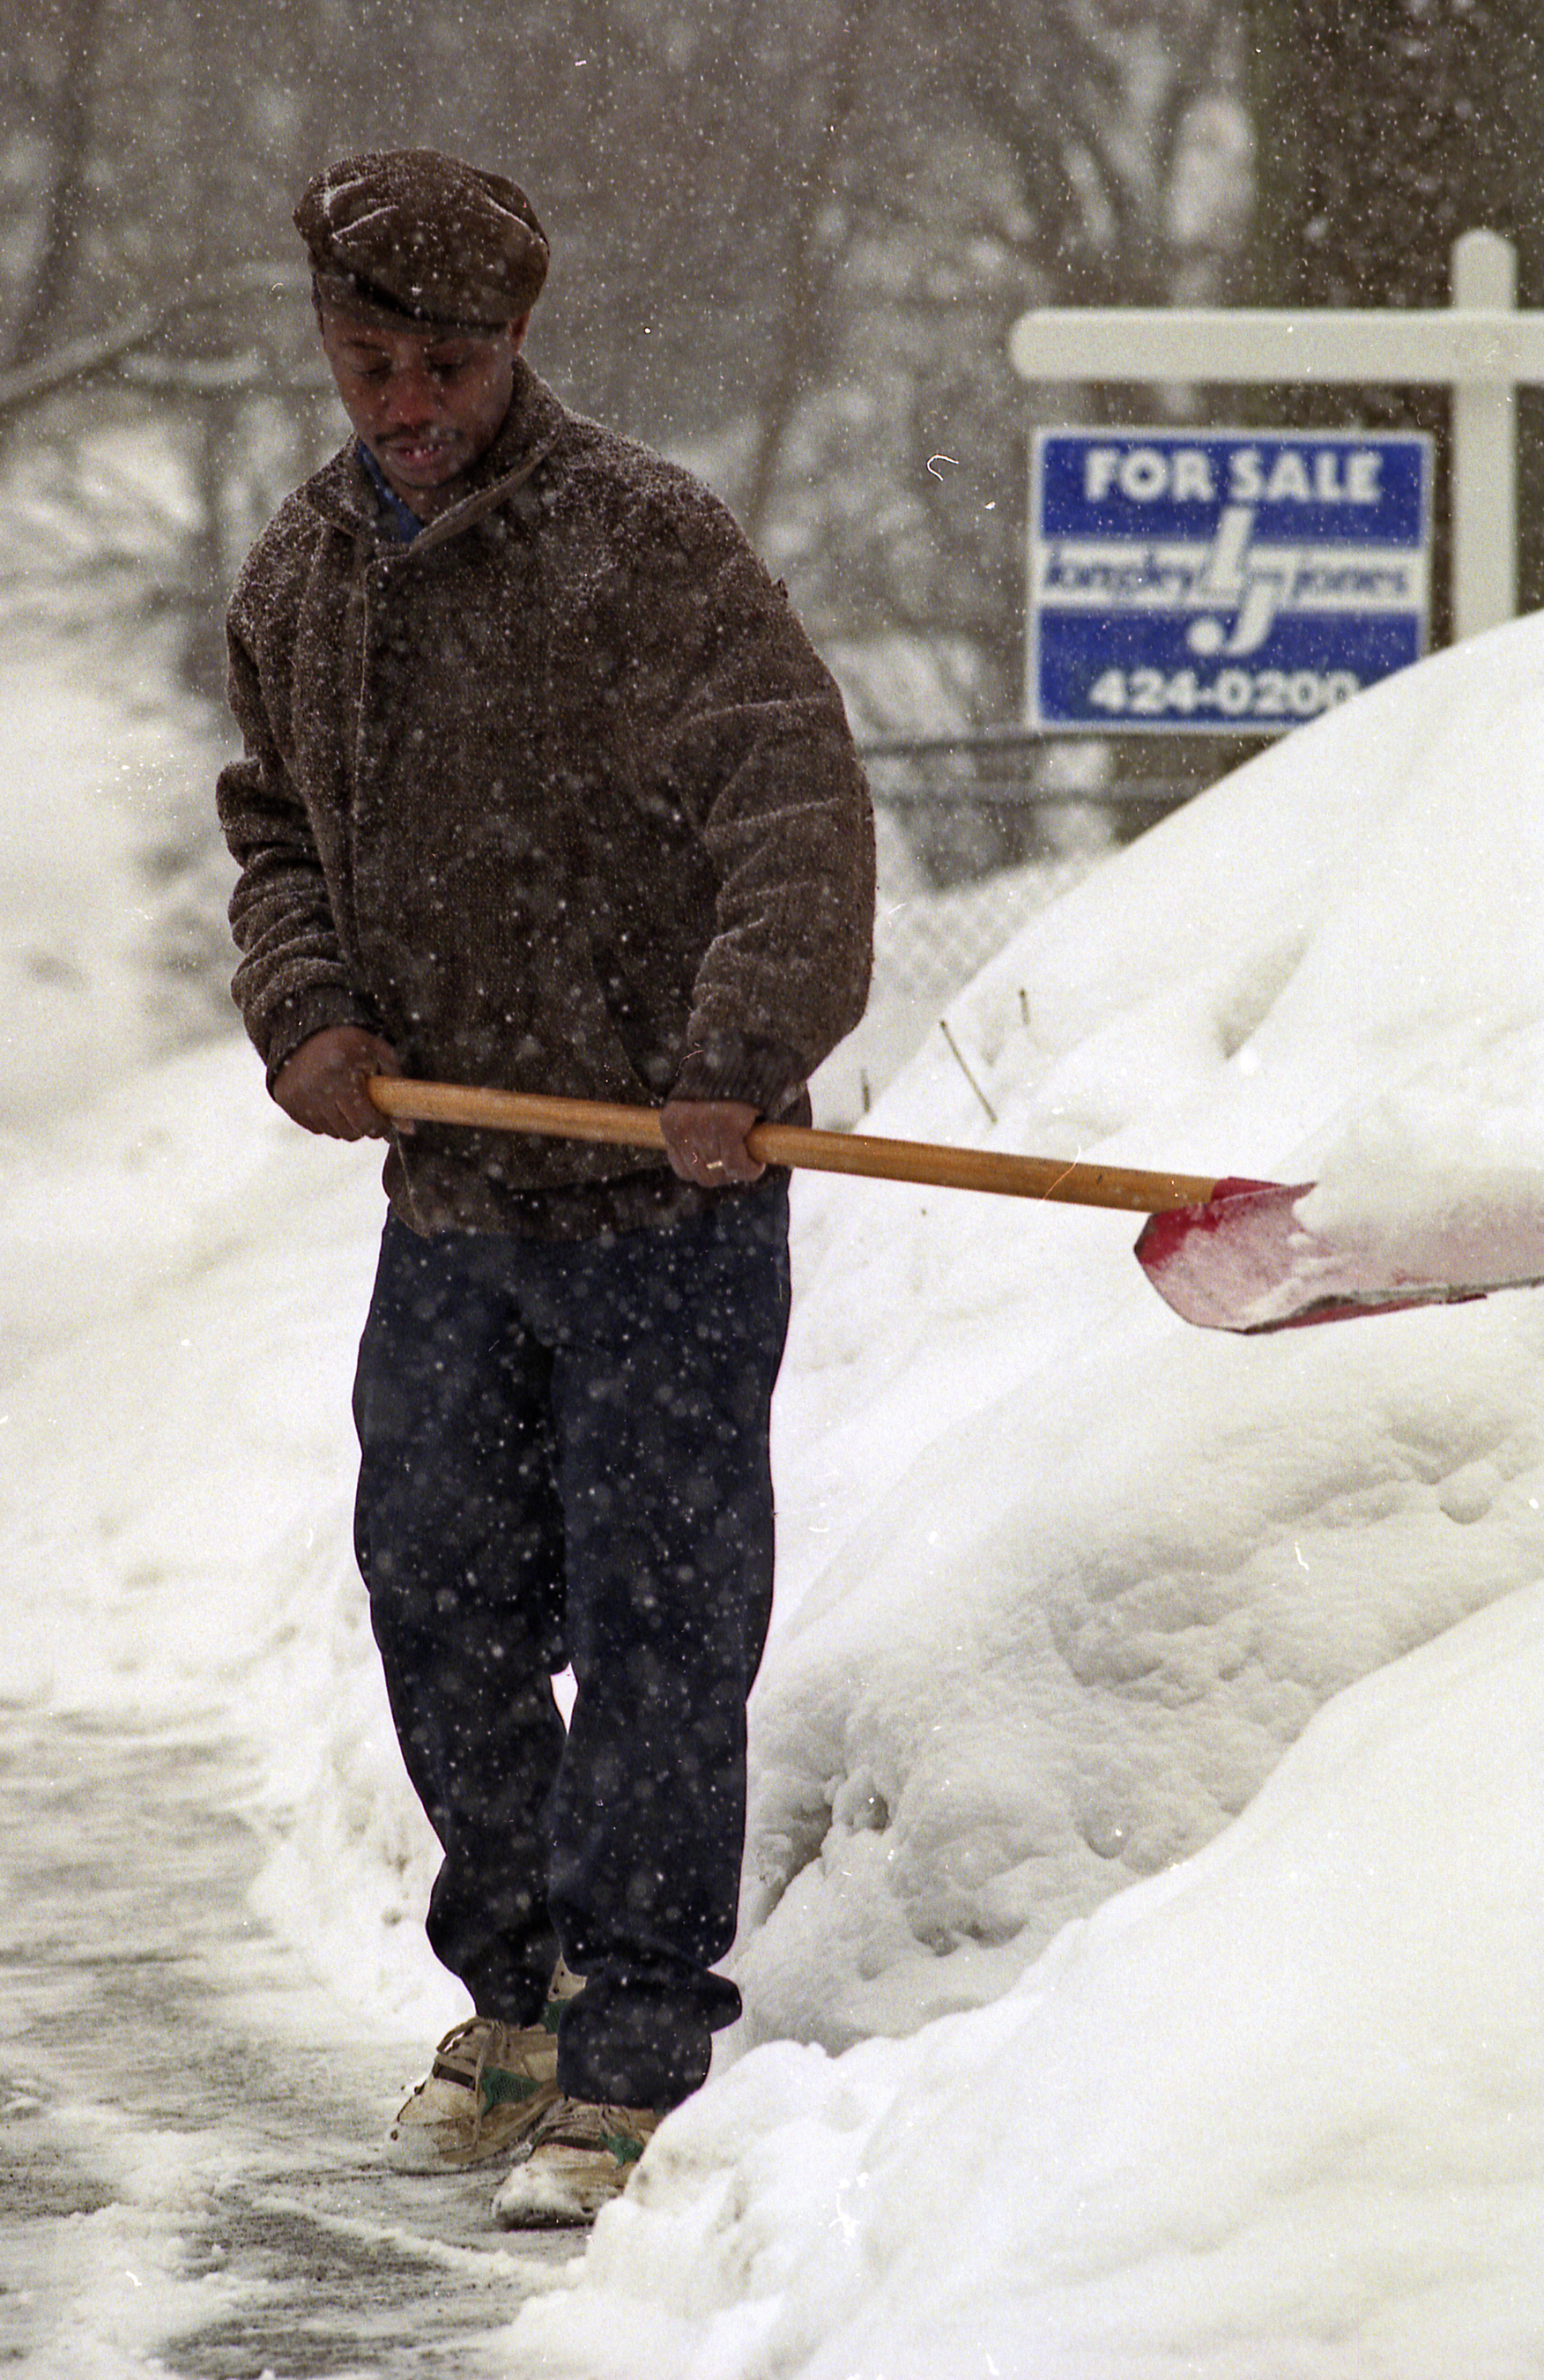 William Raeford, of 2406 East Genesee Street, Syracuse, shovels out the front of his home during the Blizzard of 1993.